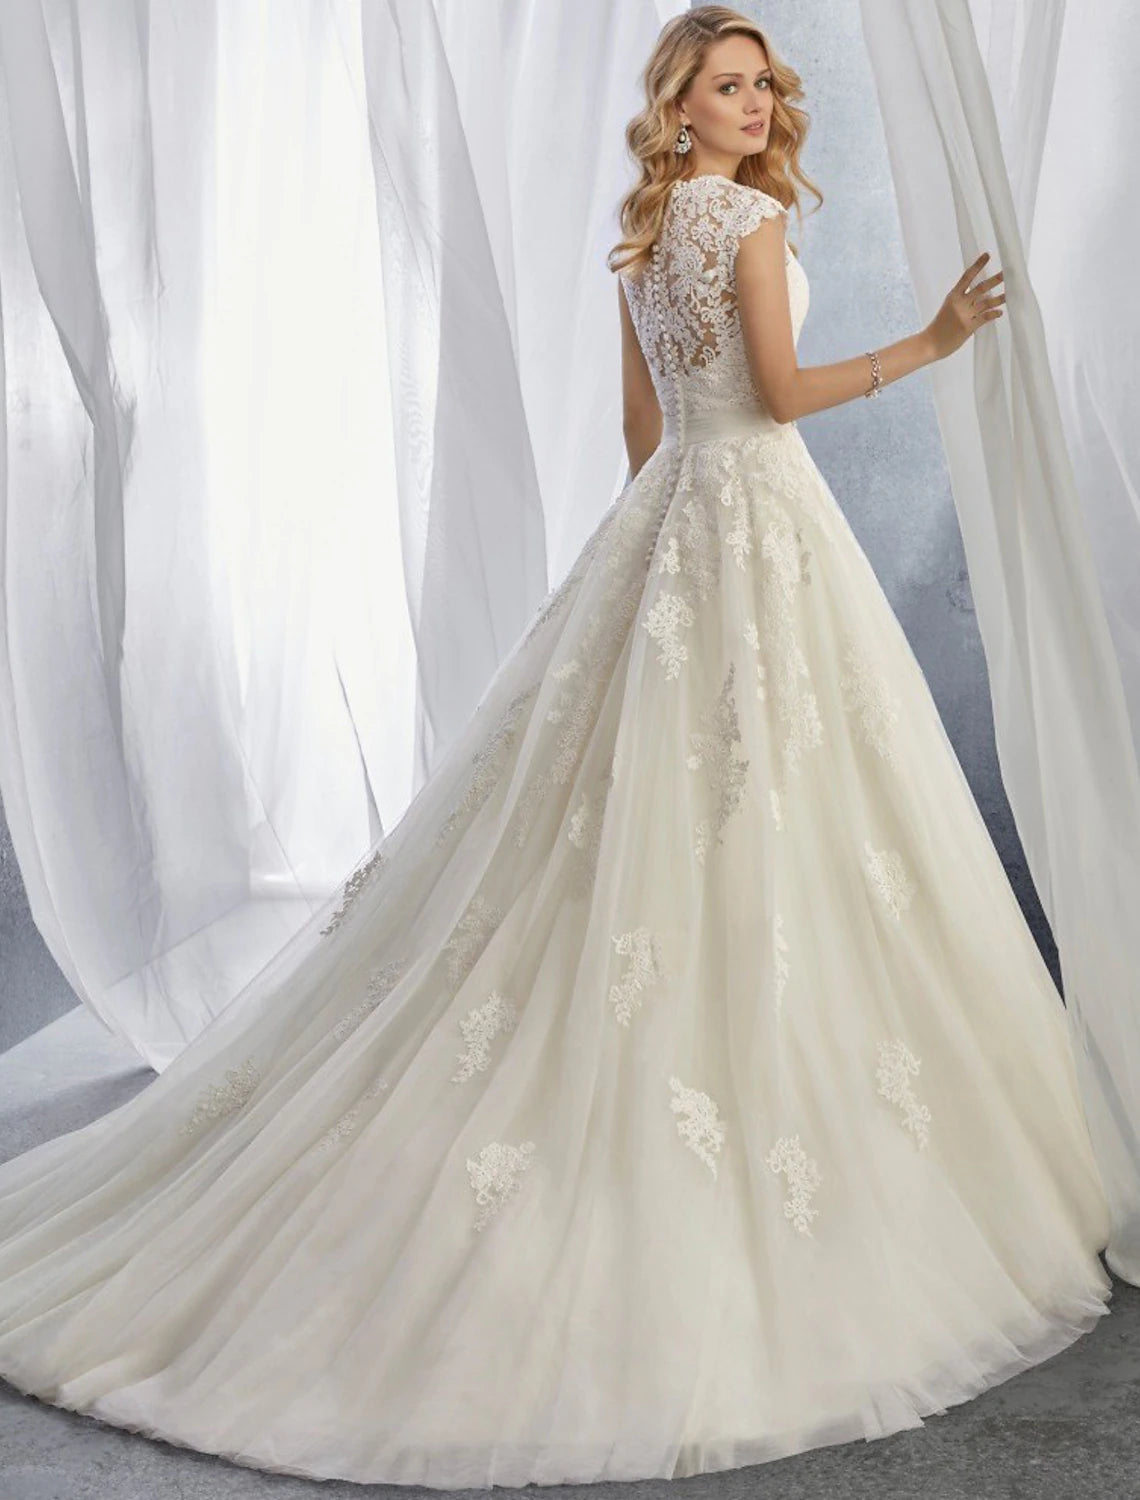 Engagement Formal Wedding Dresses Ball Gown Sweetheart Cap Sleeve Court Train Lace Bridal Gowns With Appliques